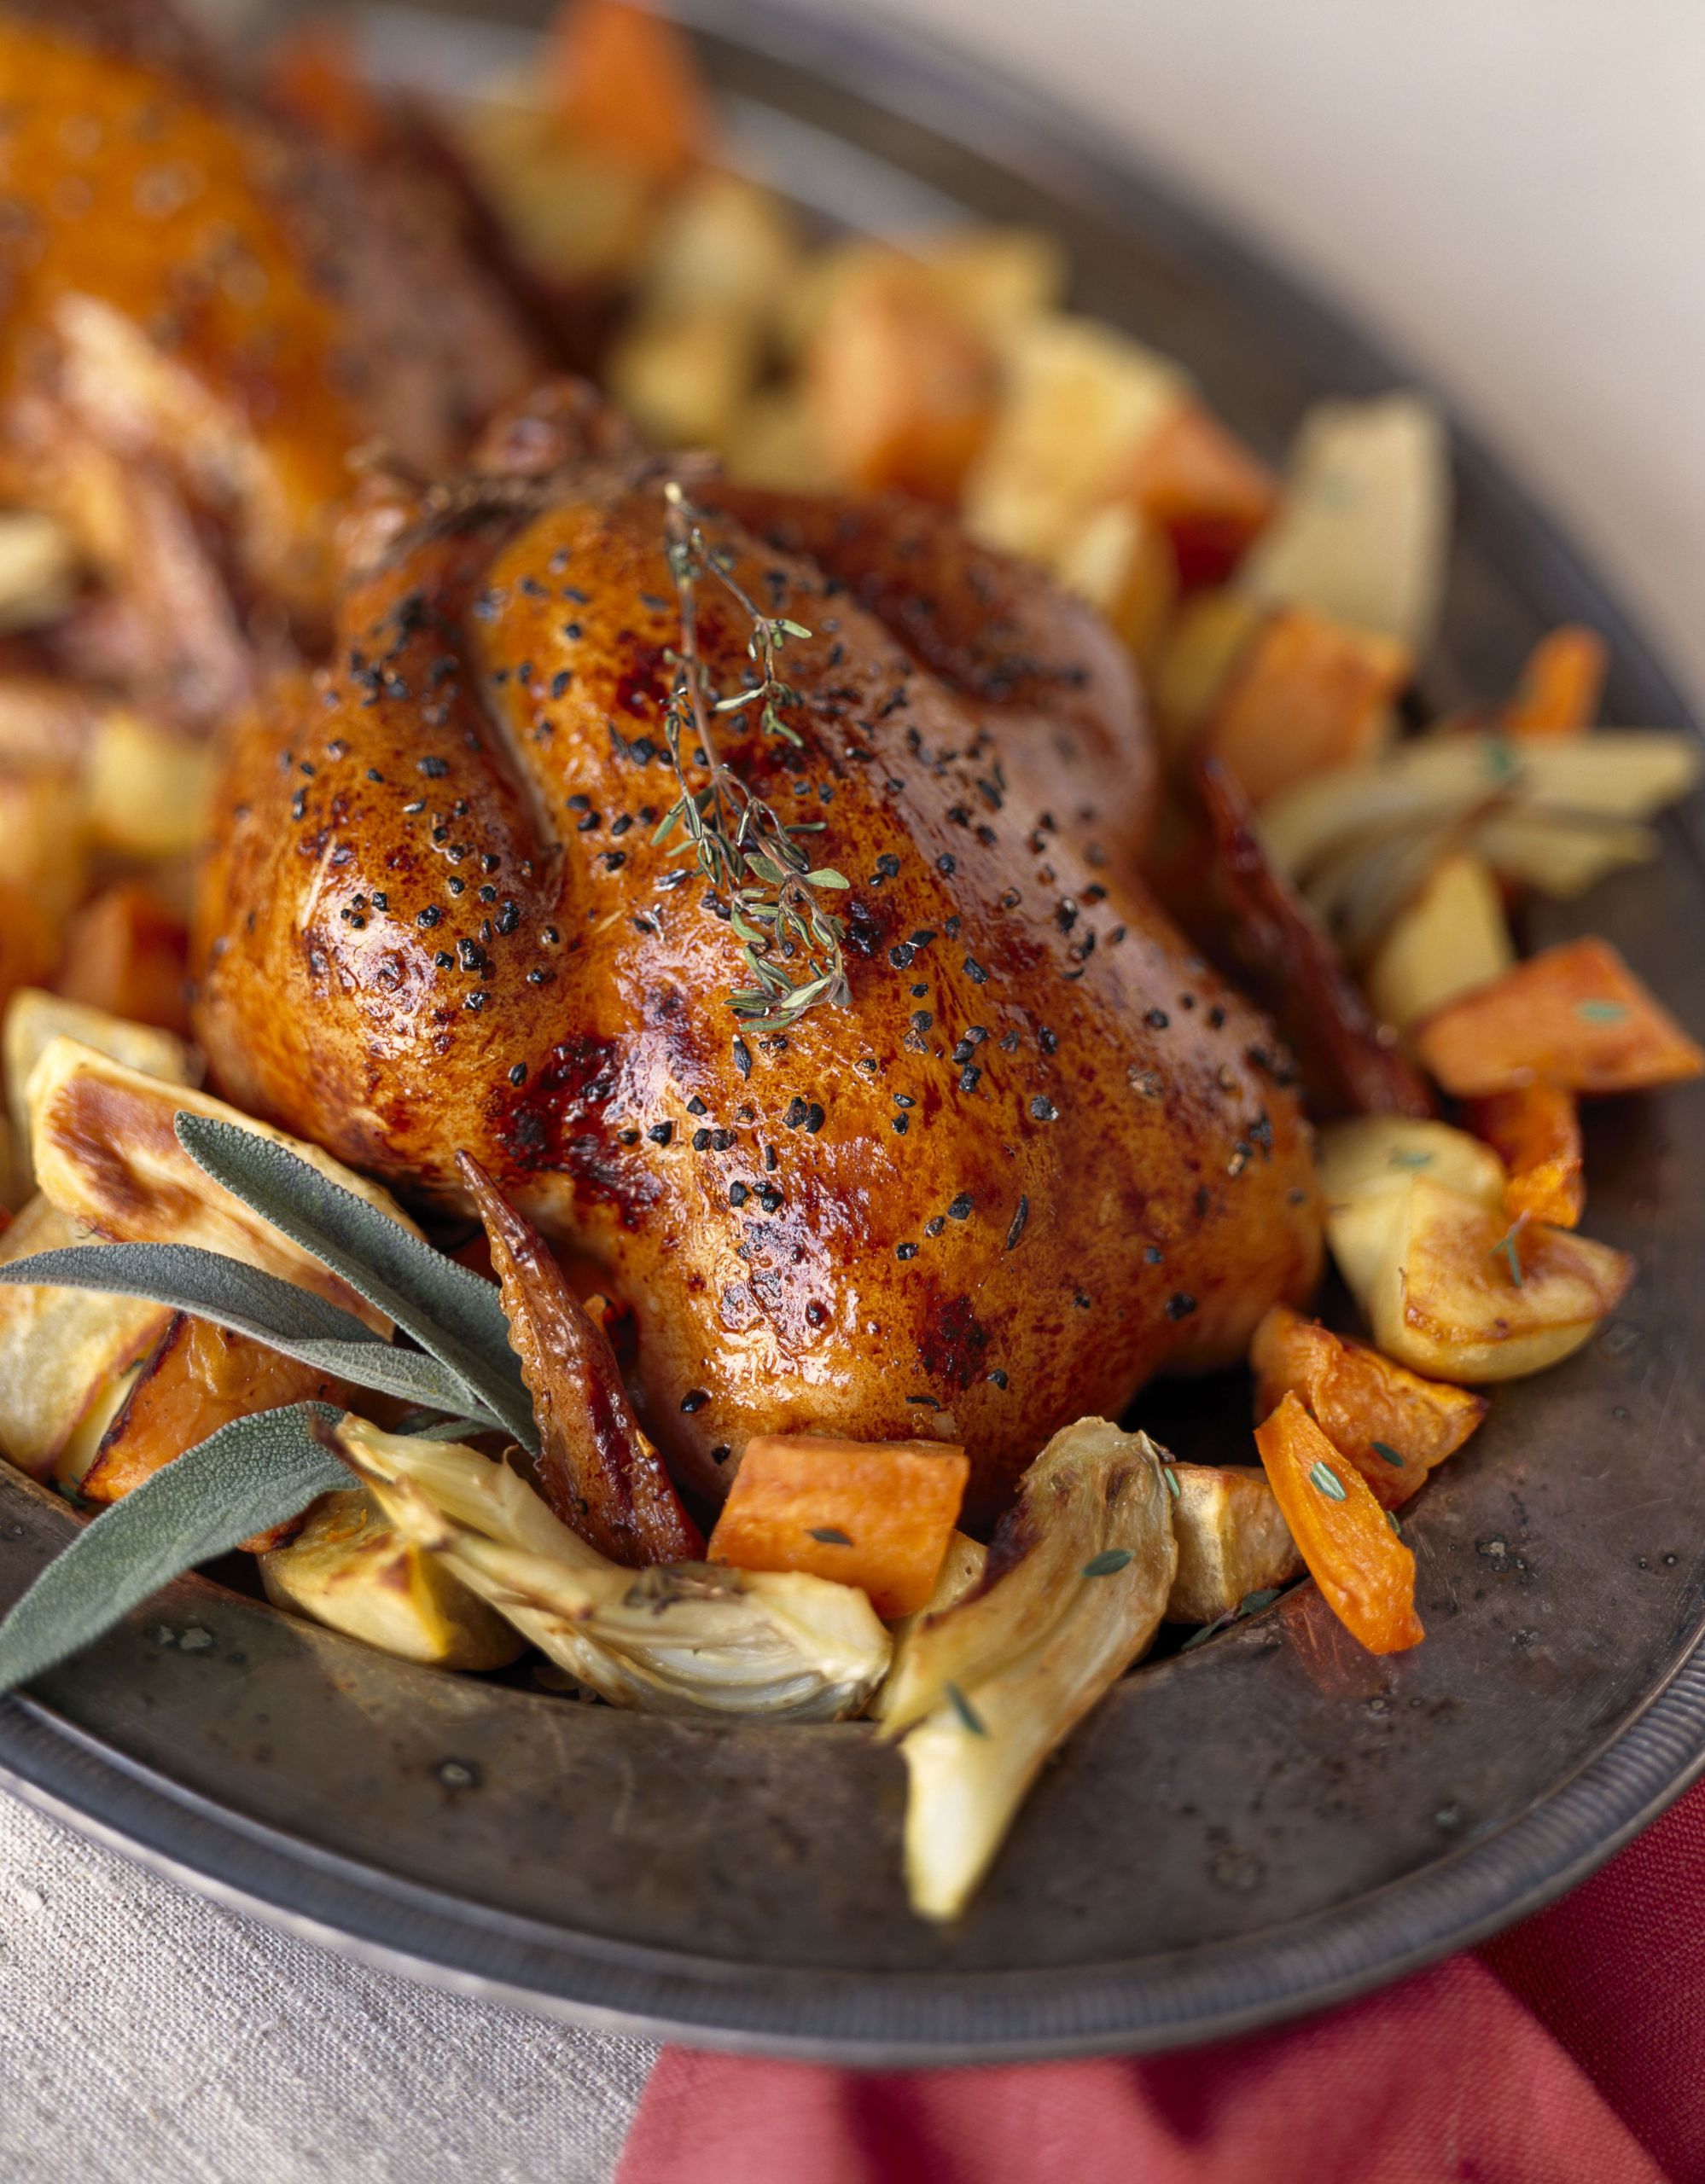 Recipes For Cornish Game Hens
 Herb and Spice Roasted Cornish Game Hens Recipe